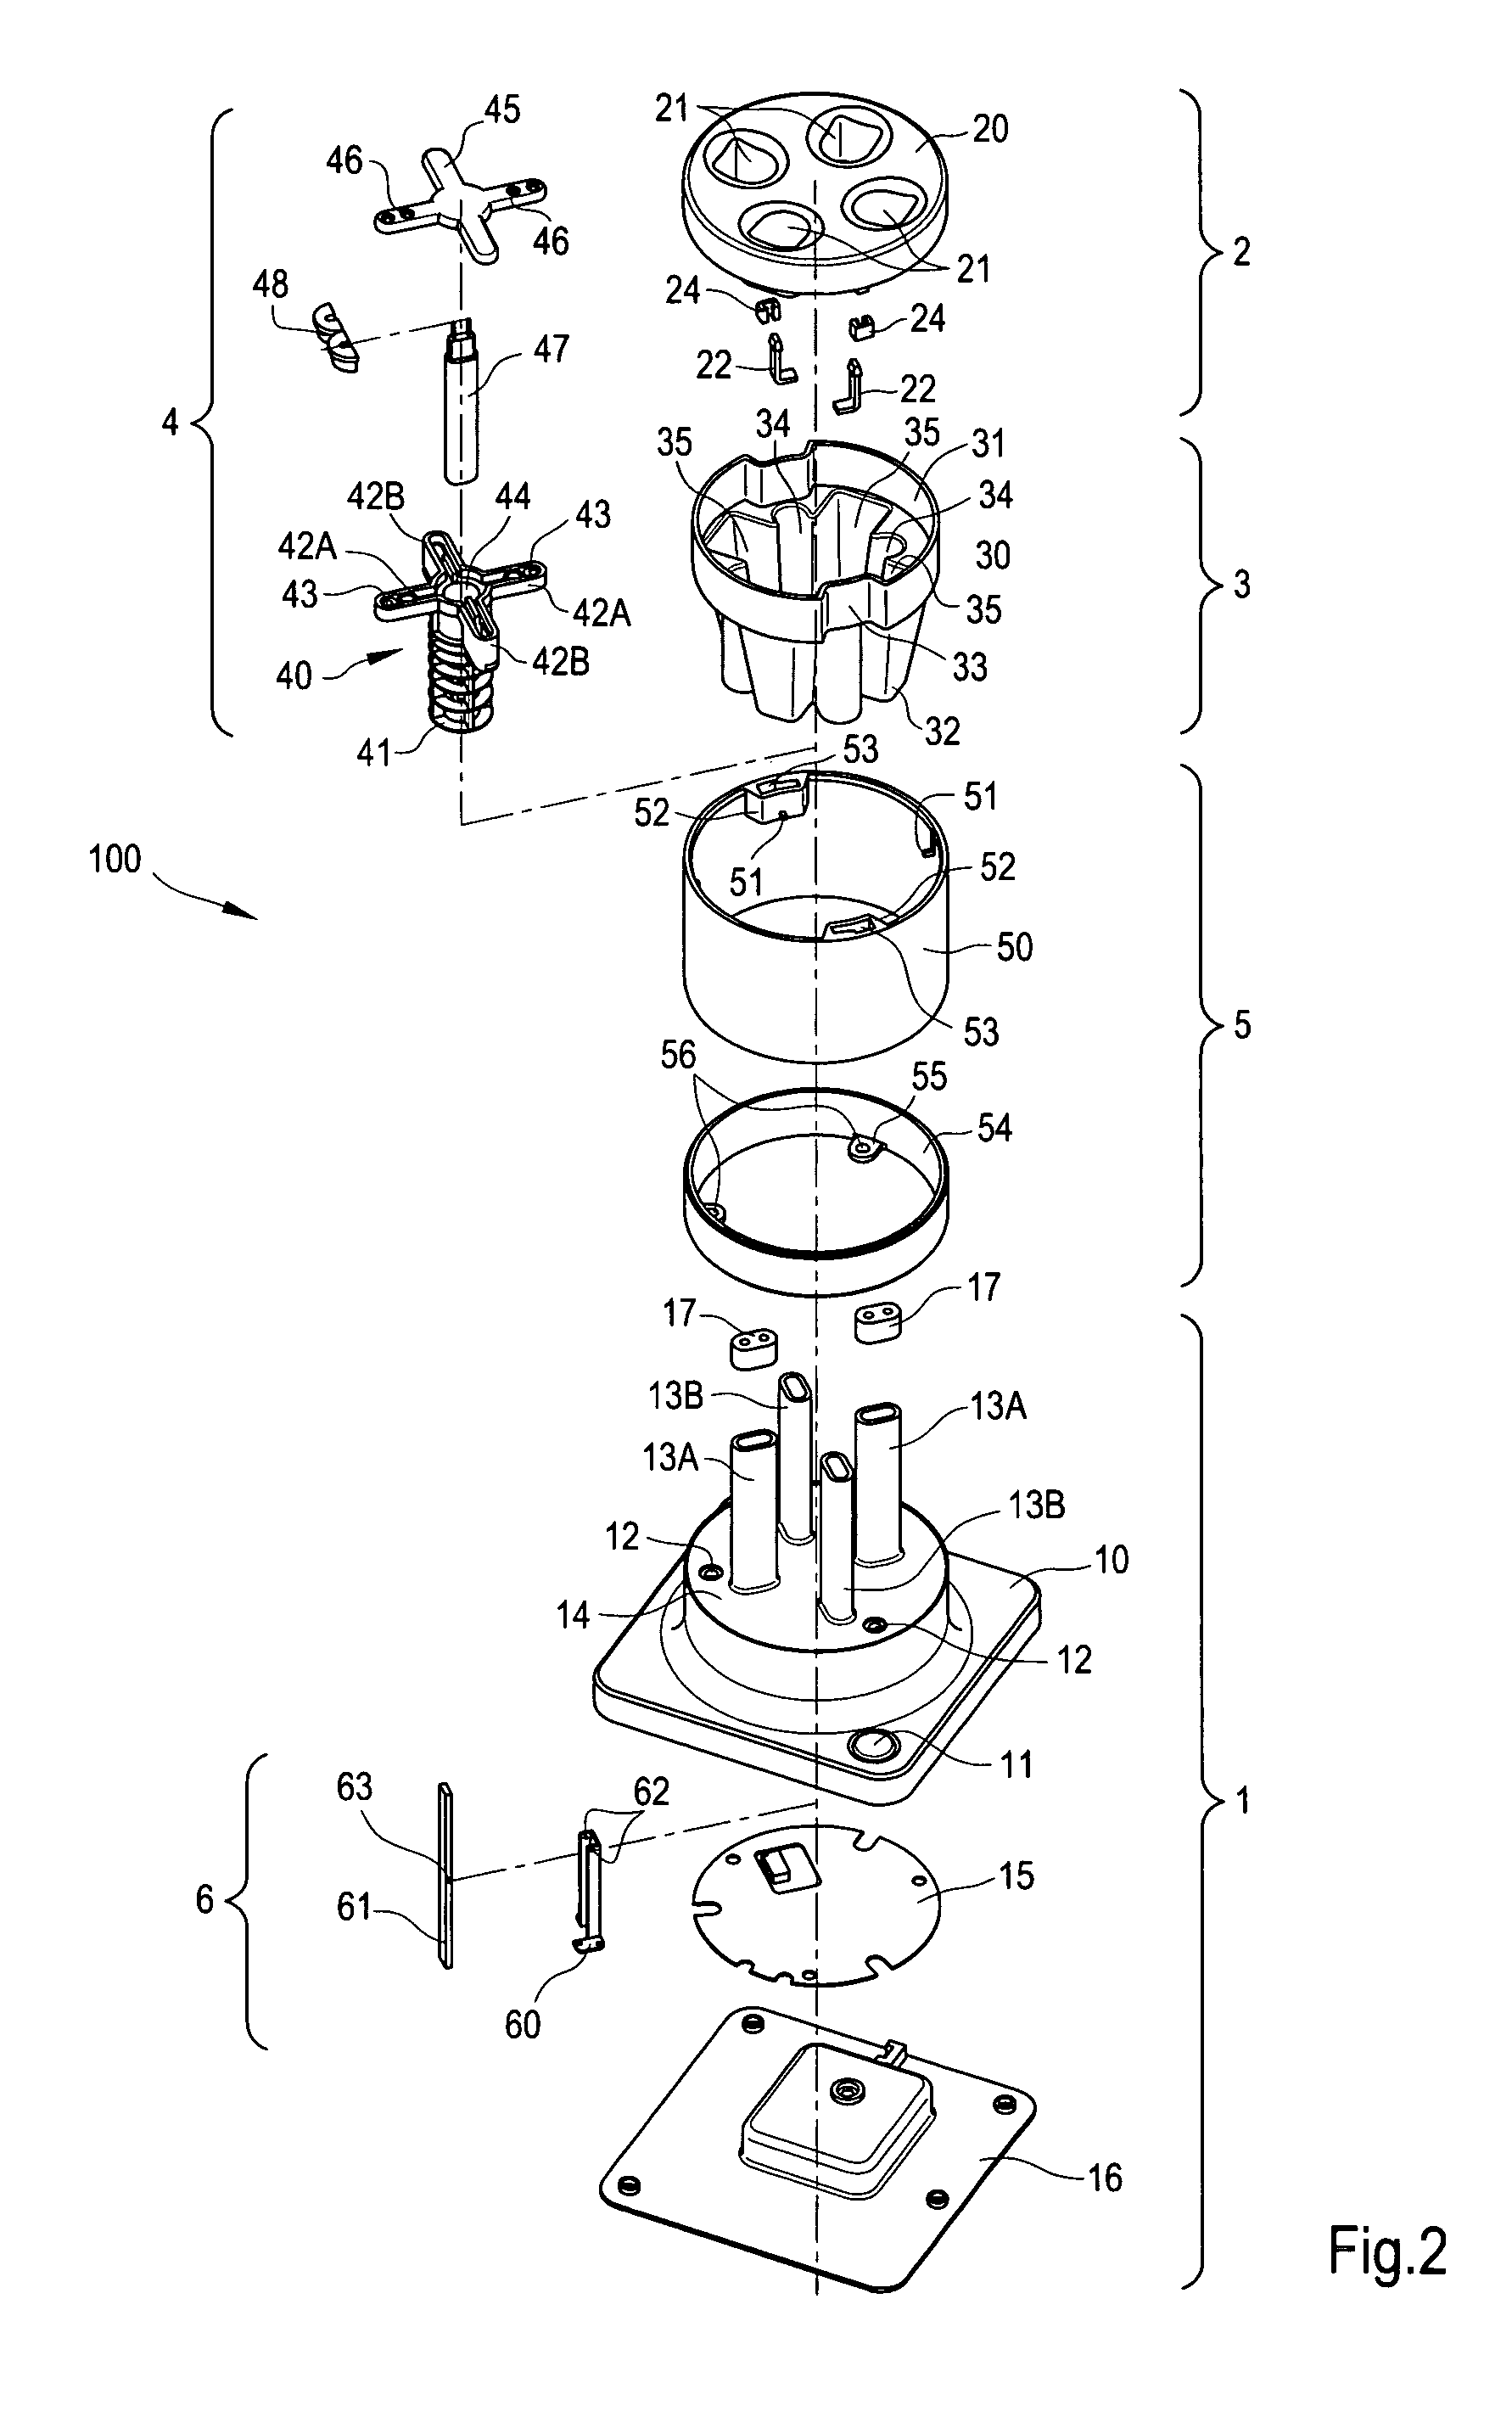 Ultraviolet disinfection device